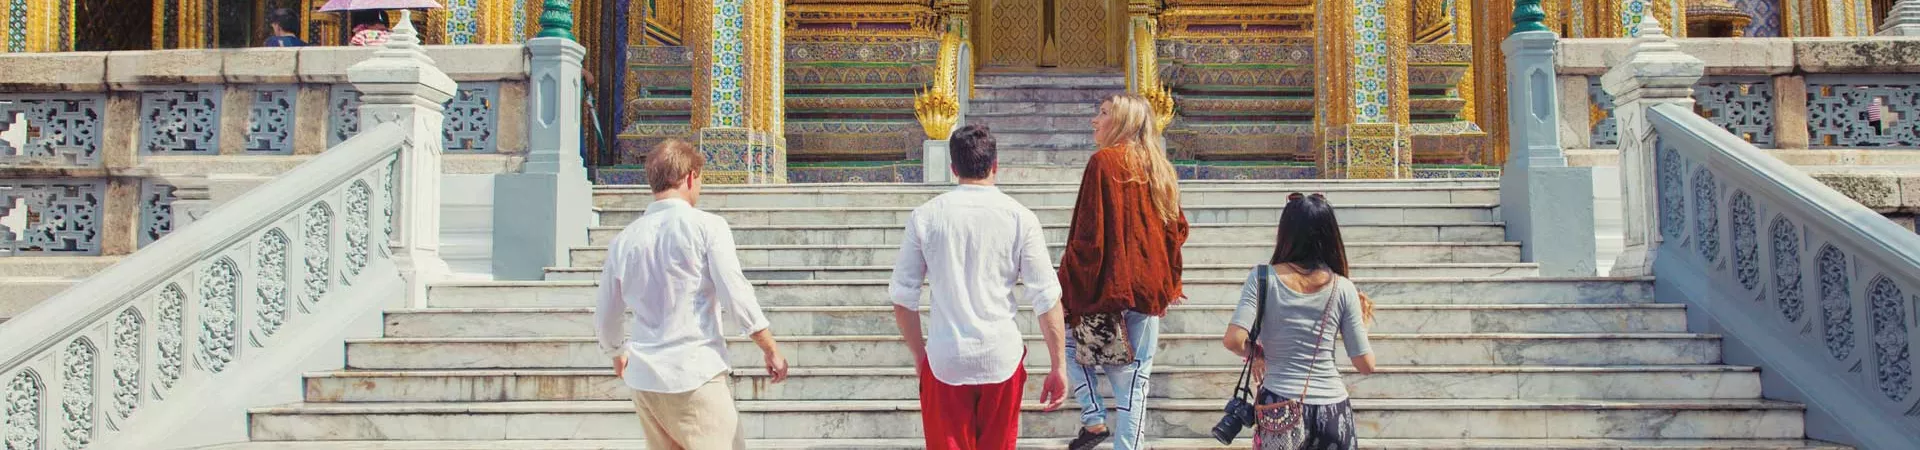 Group Of Travelers Walking Up Steps To Temple In Asia